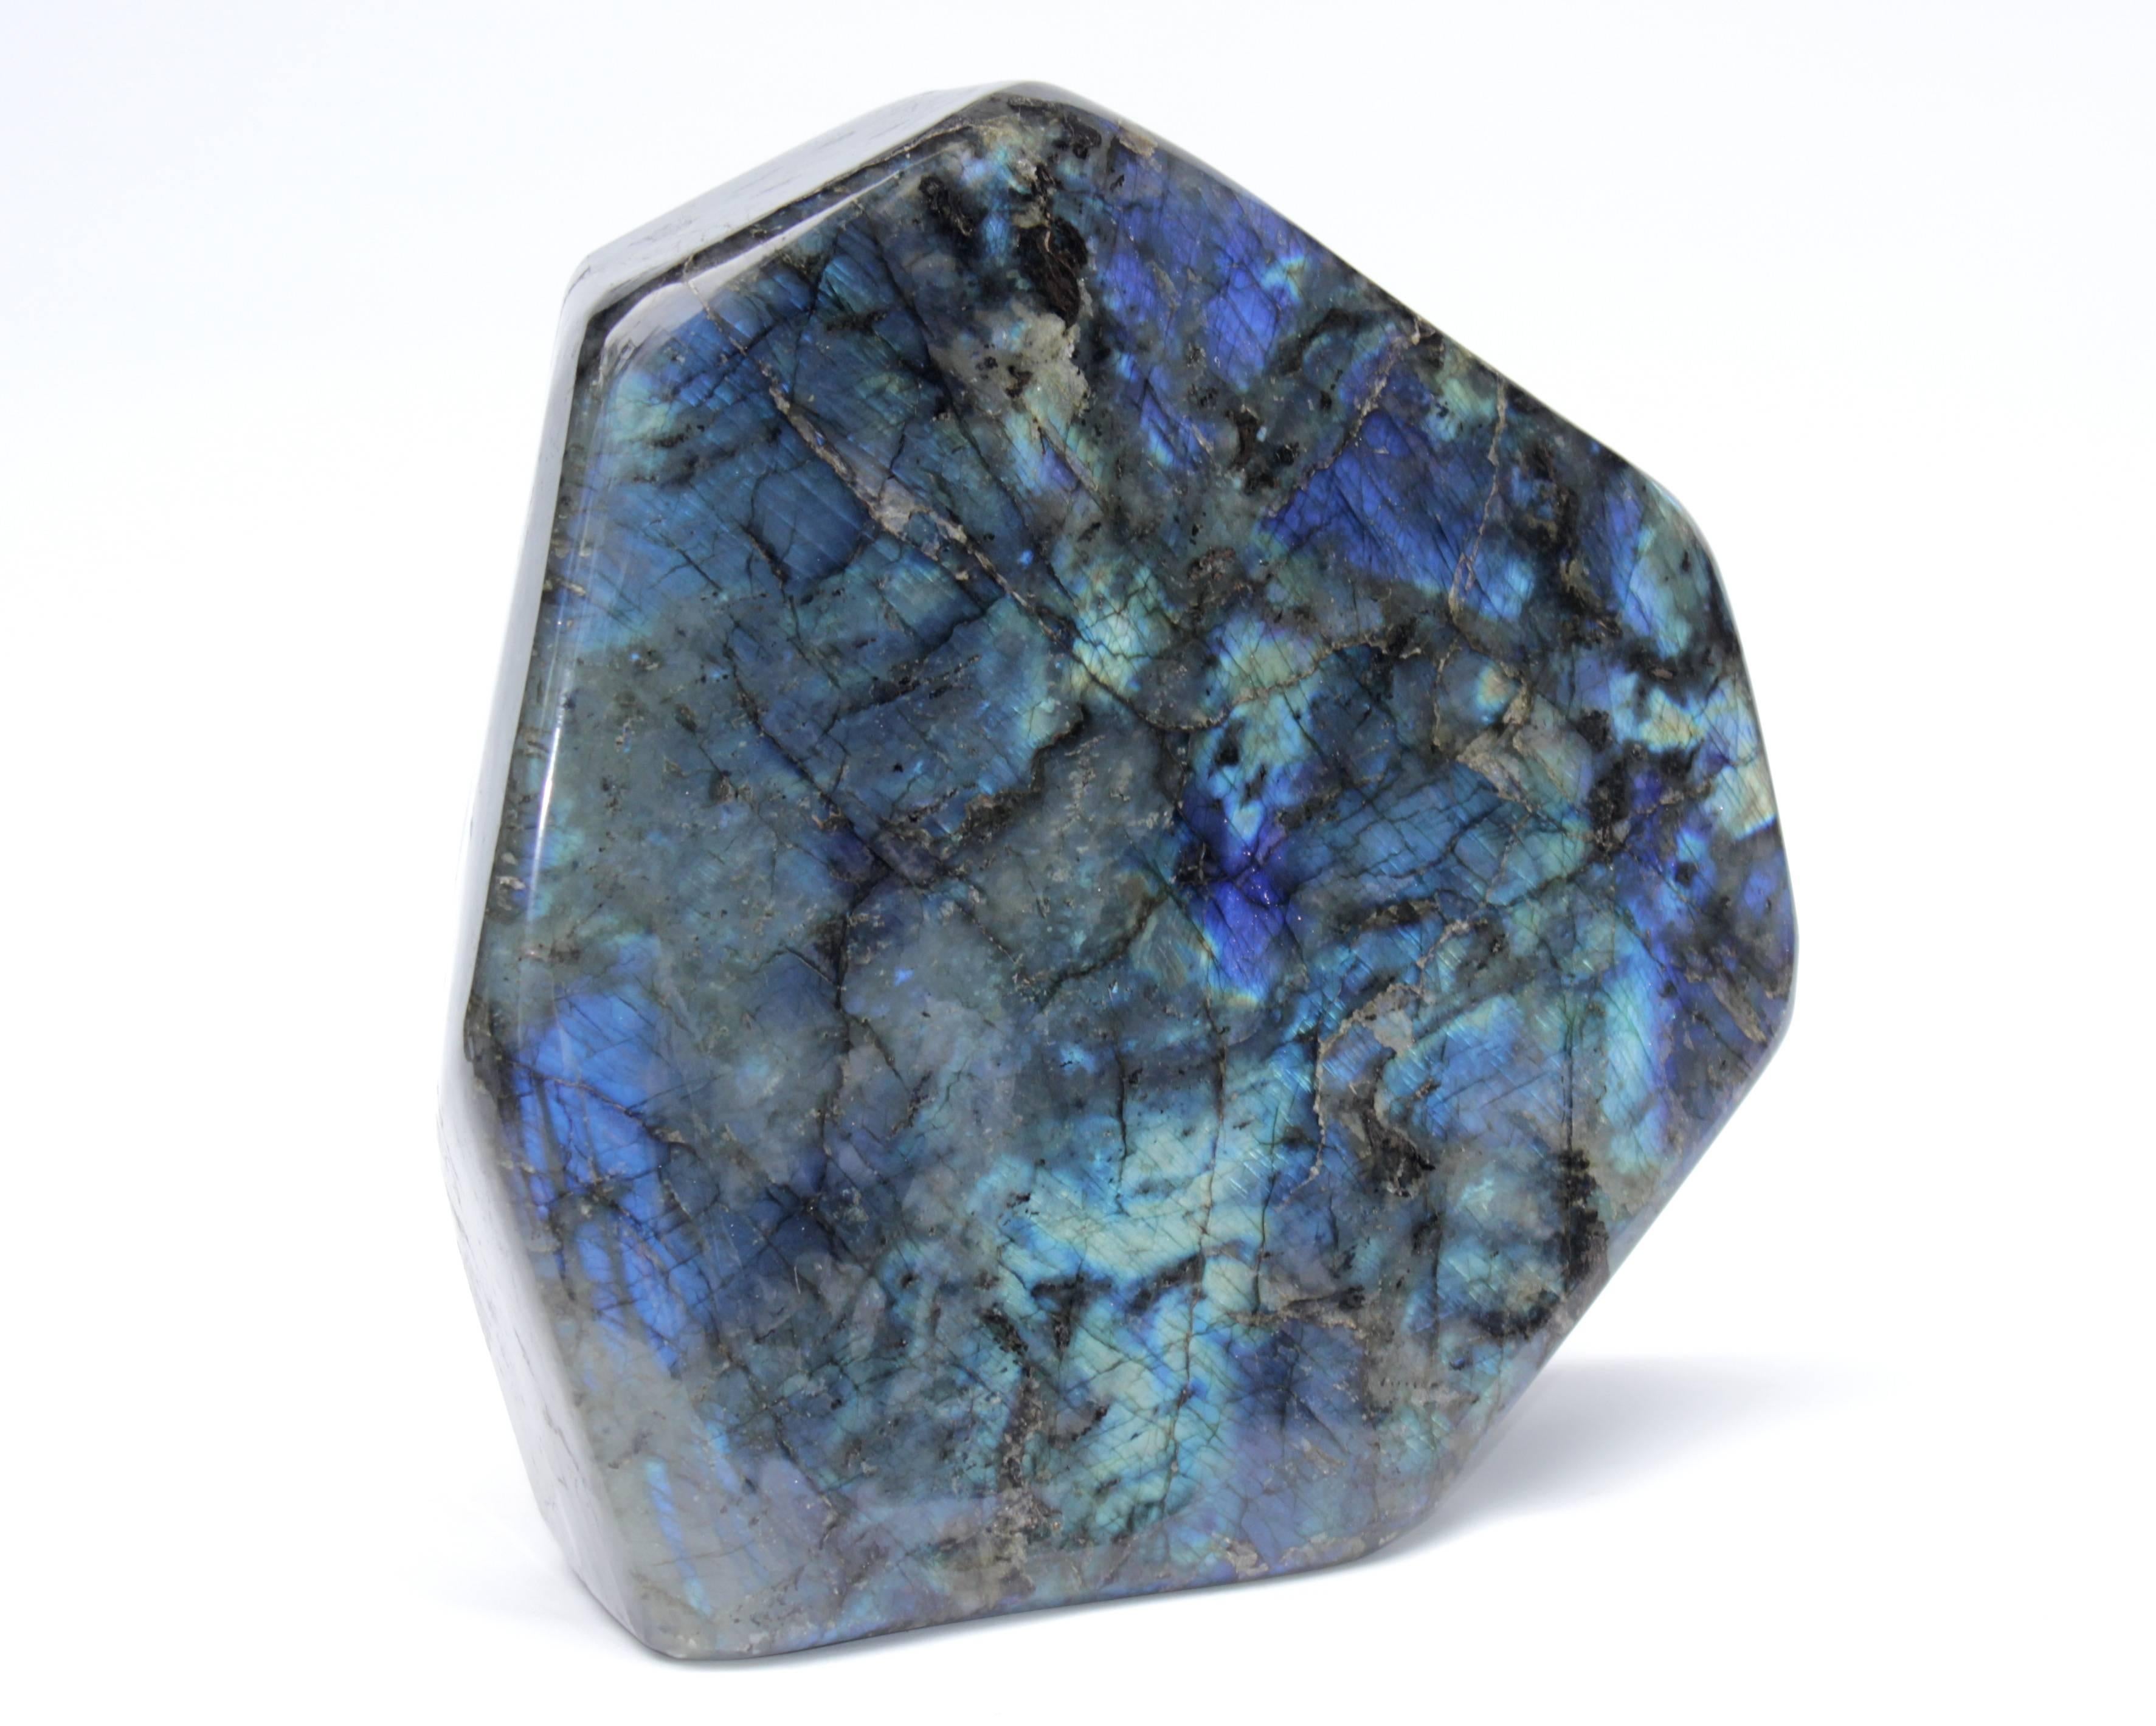 This is a large natural specimen piece of polished organic Labradorite. Polished on all sides. Labradorite is a plagioclase feldspar with an iridescent play-of-color that is often used as a gemstone. It is so well known for these spectacular